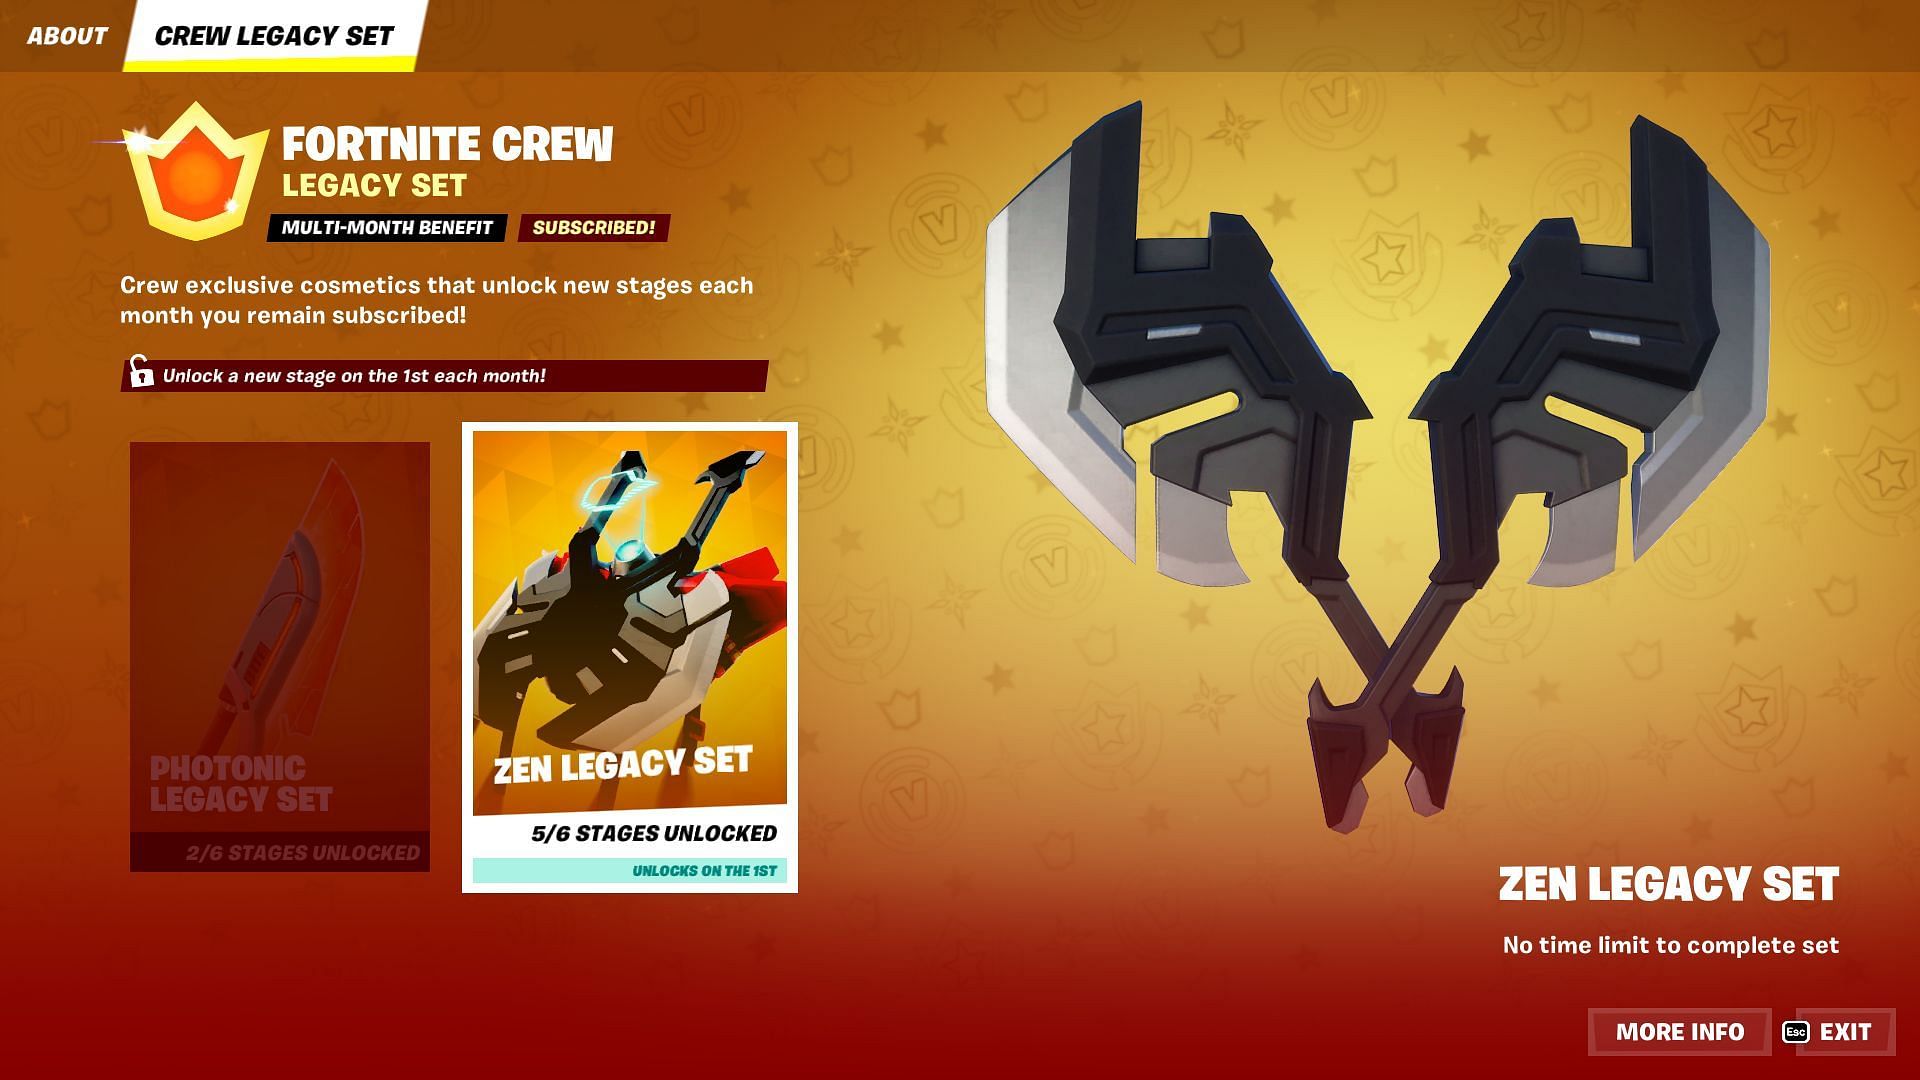 Crew subscribers will unlock the next stage of Photonic and Zen Legacy Sets on January 1, 2023 (Image via Epic Games/Fortnite)